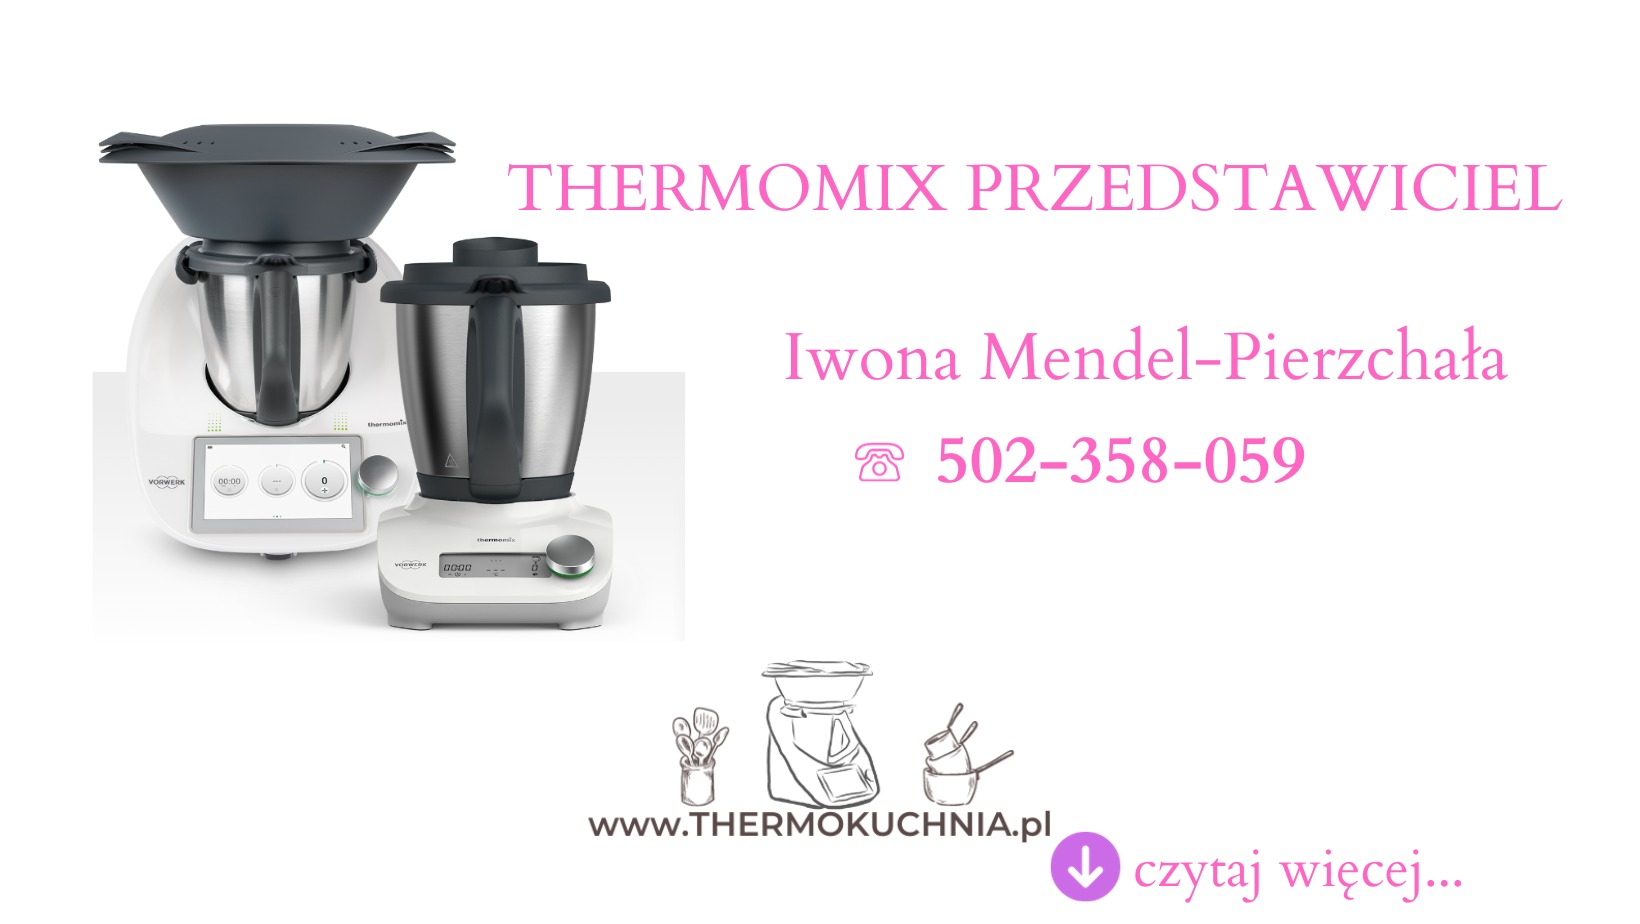 THERMOMIX NOWY TARG